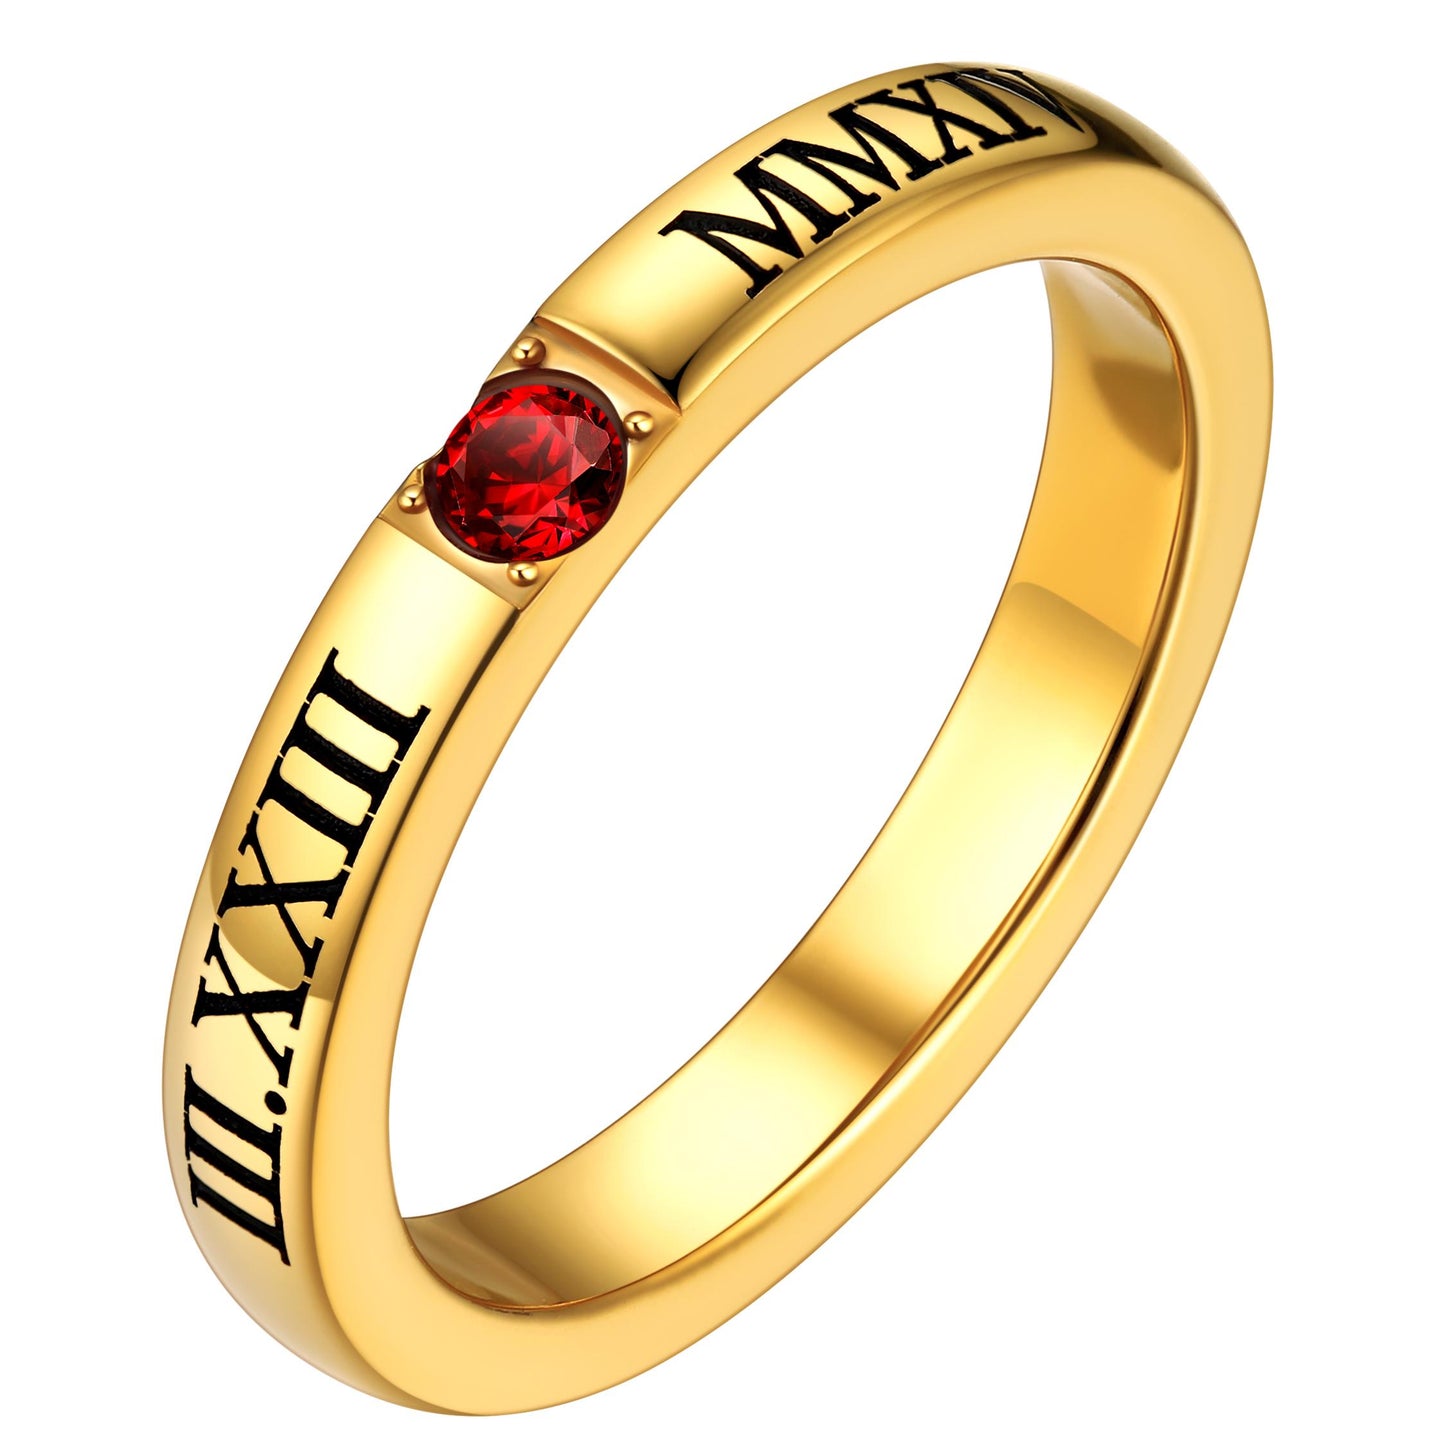 Birthstonesjewelry Personalized Birthstone Roman Numerals Engraved Rings Gold